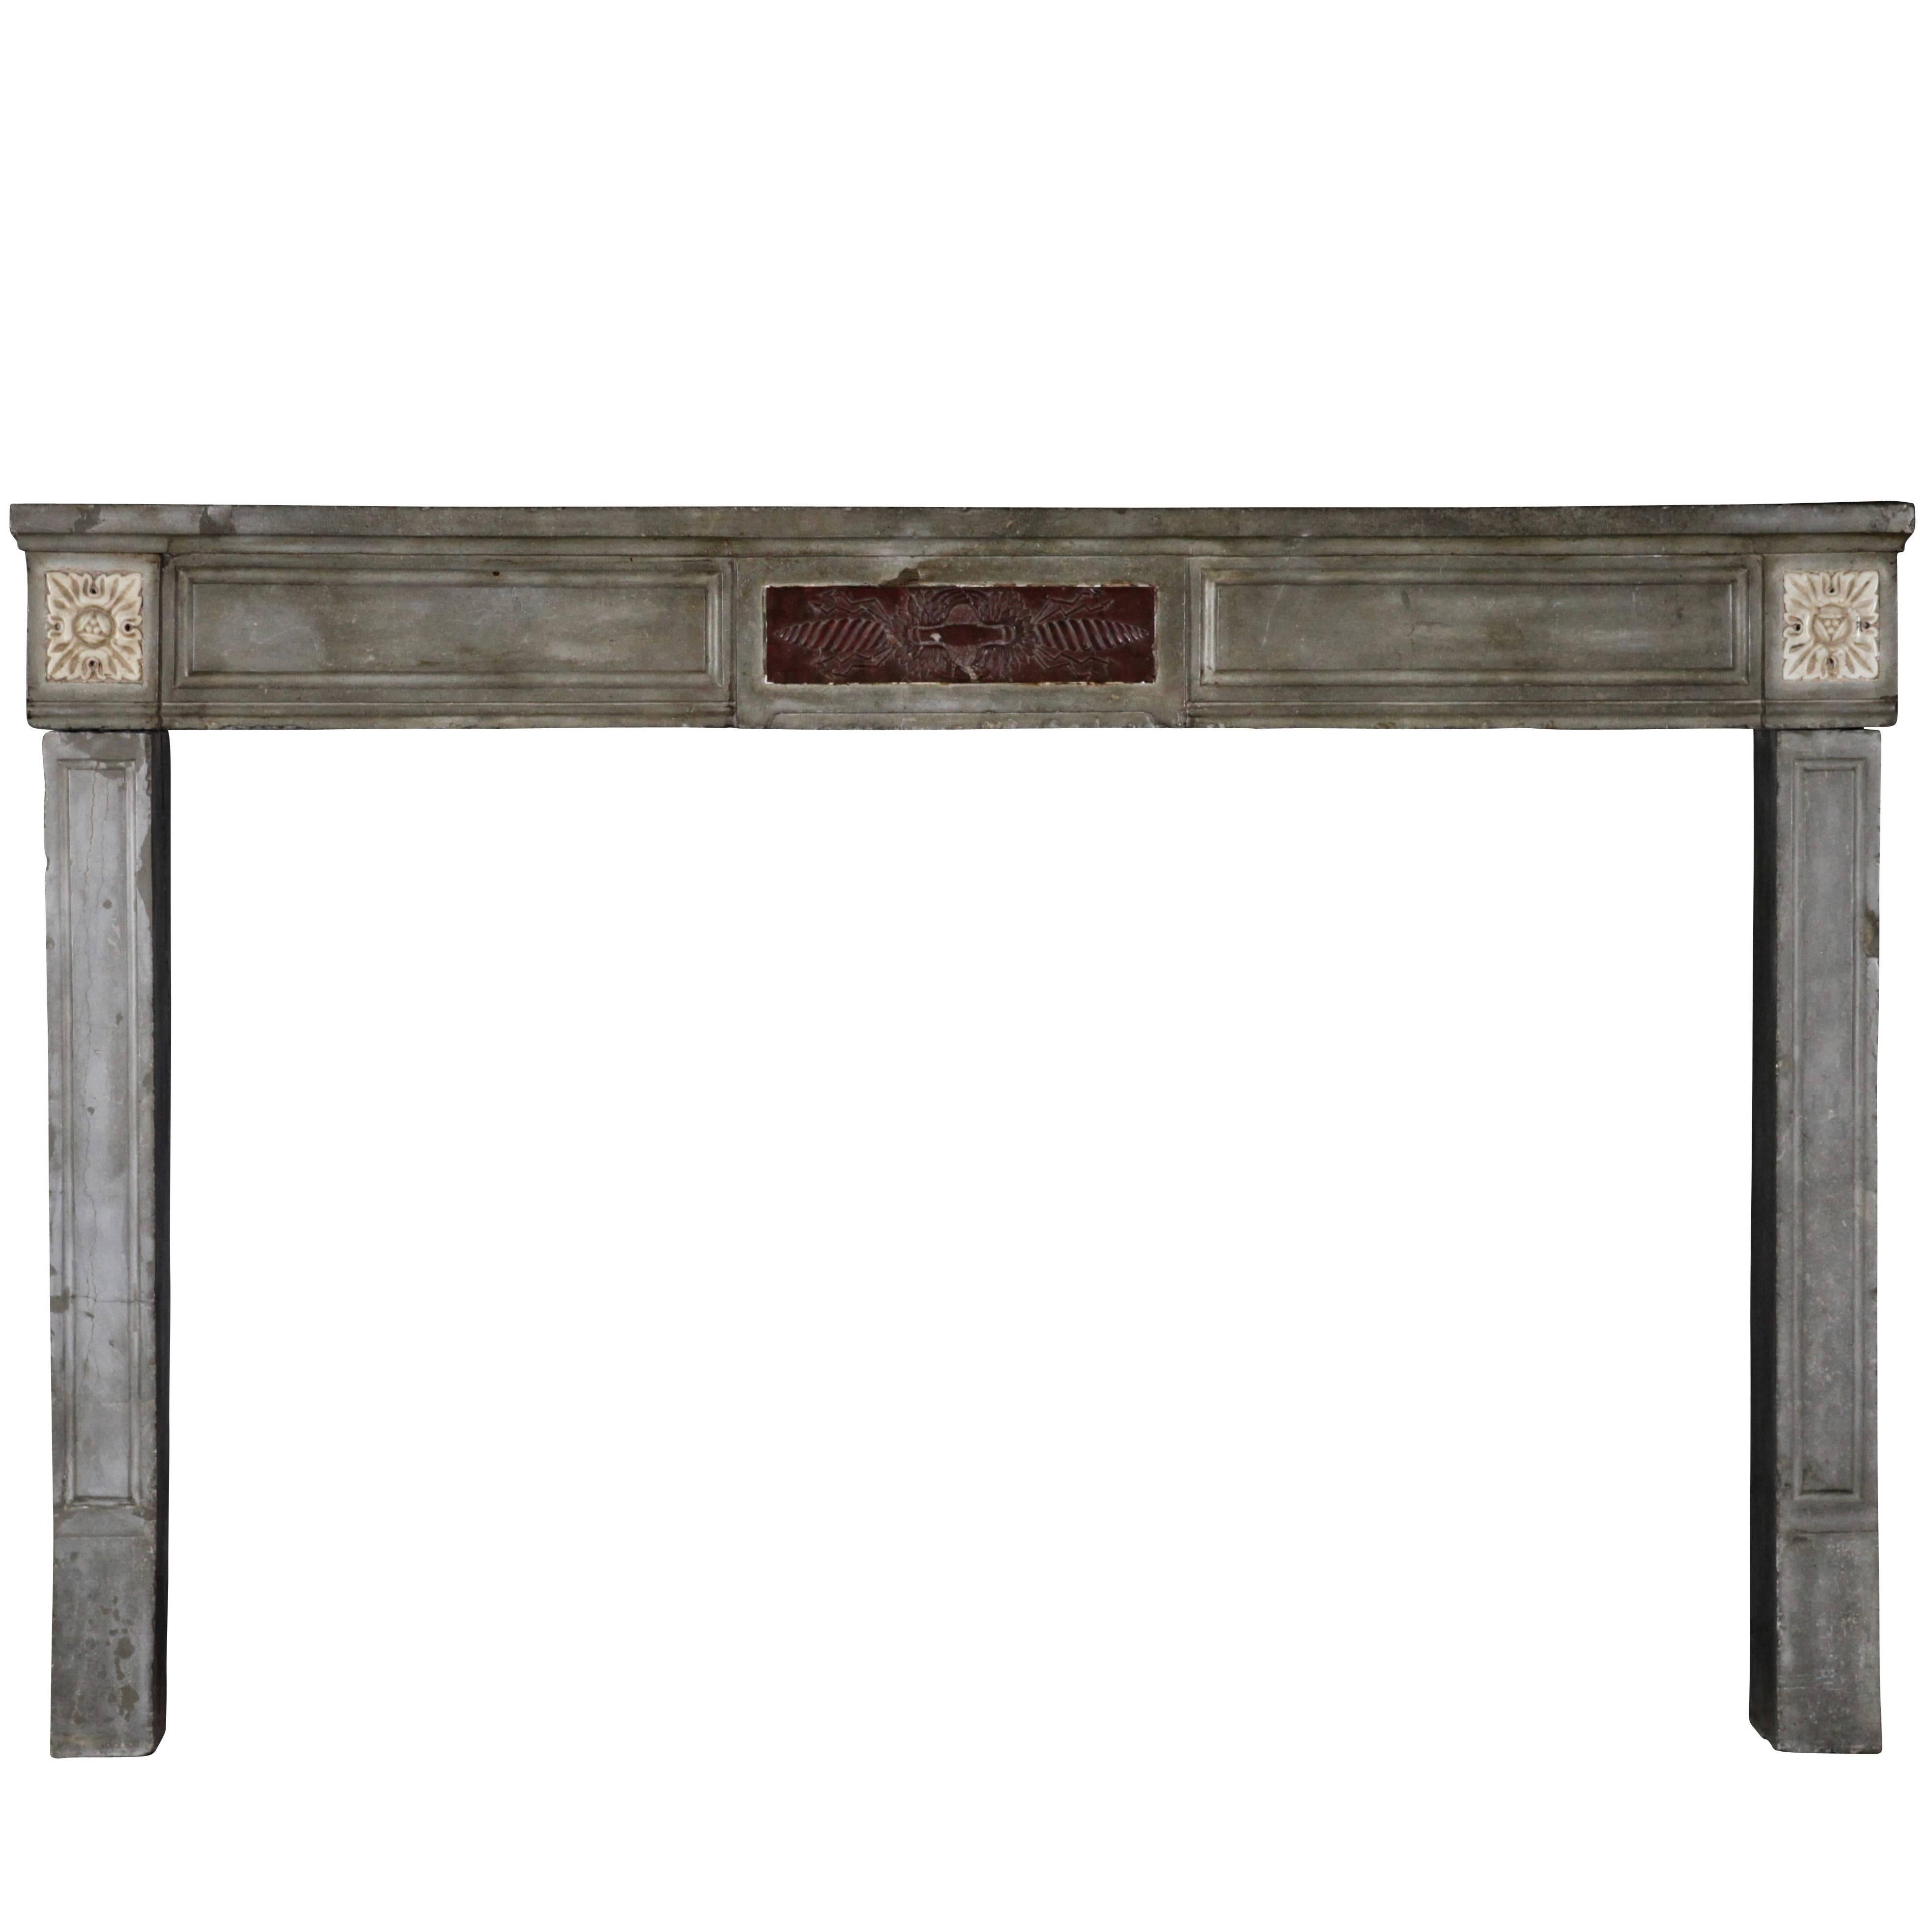 18th Century French Marble Stone Antique Fireplace Mantel For Sale